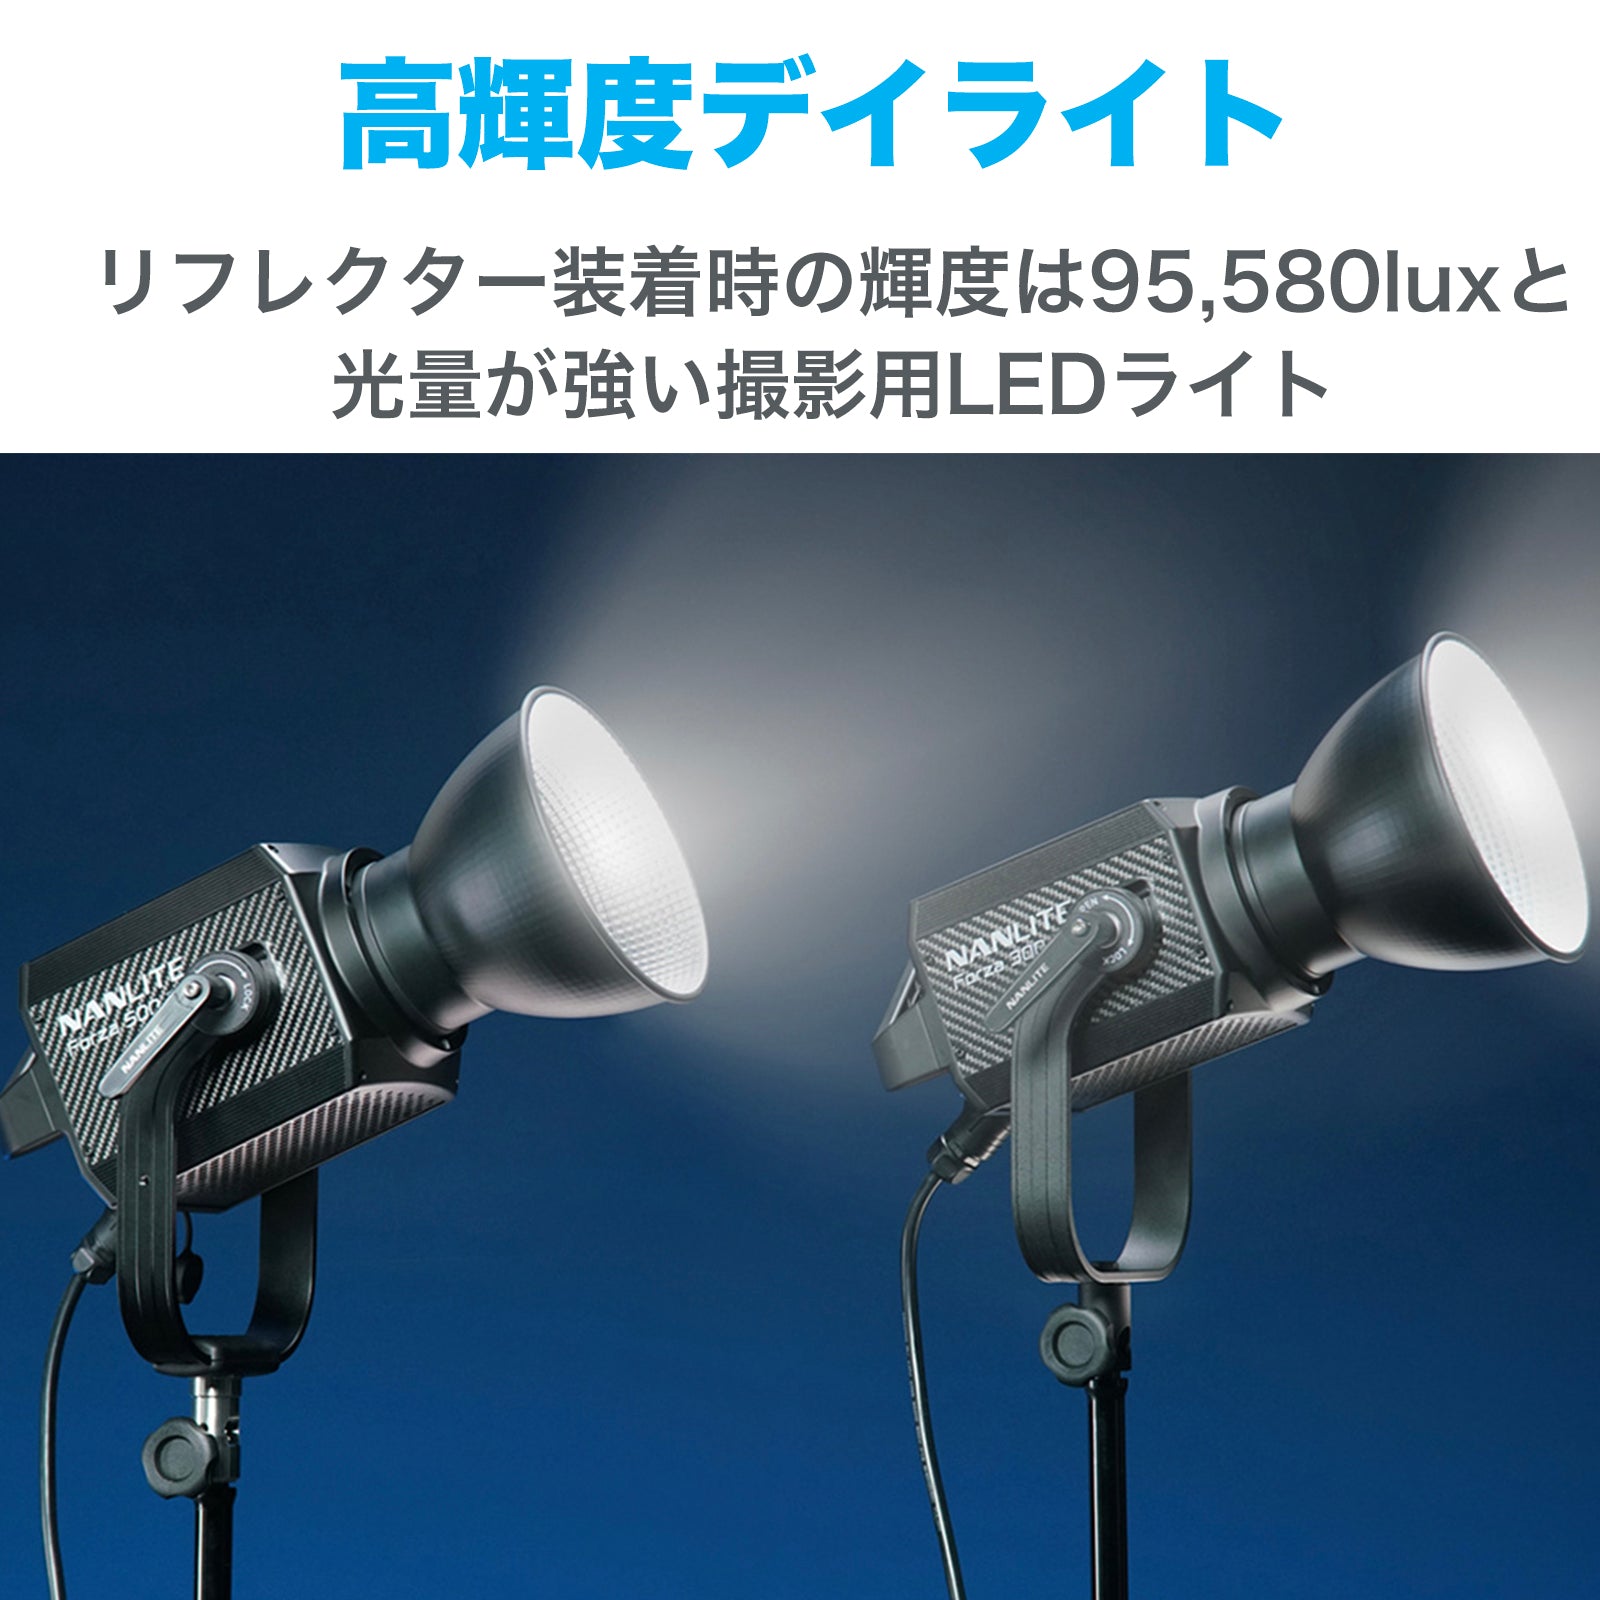 NANLITE Forza 500 II 撮影用ライト LEDライト 色温度5600K 560W GM 